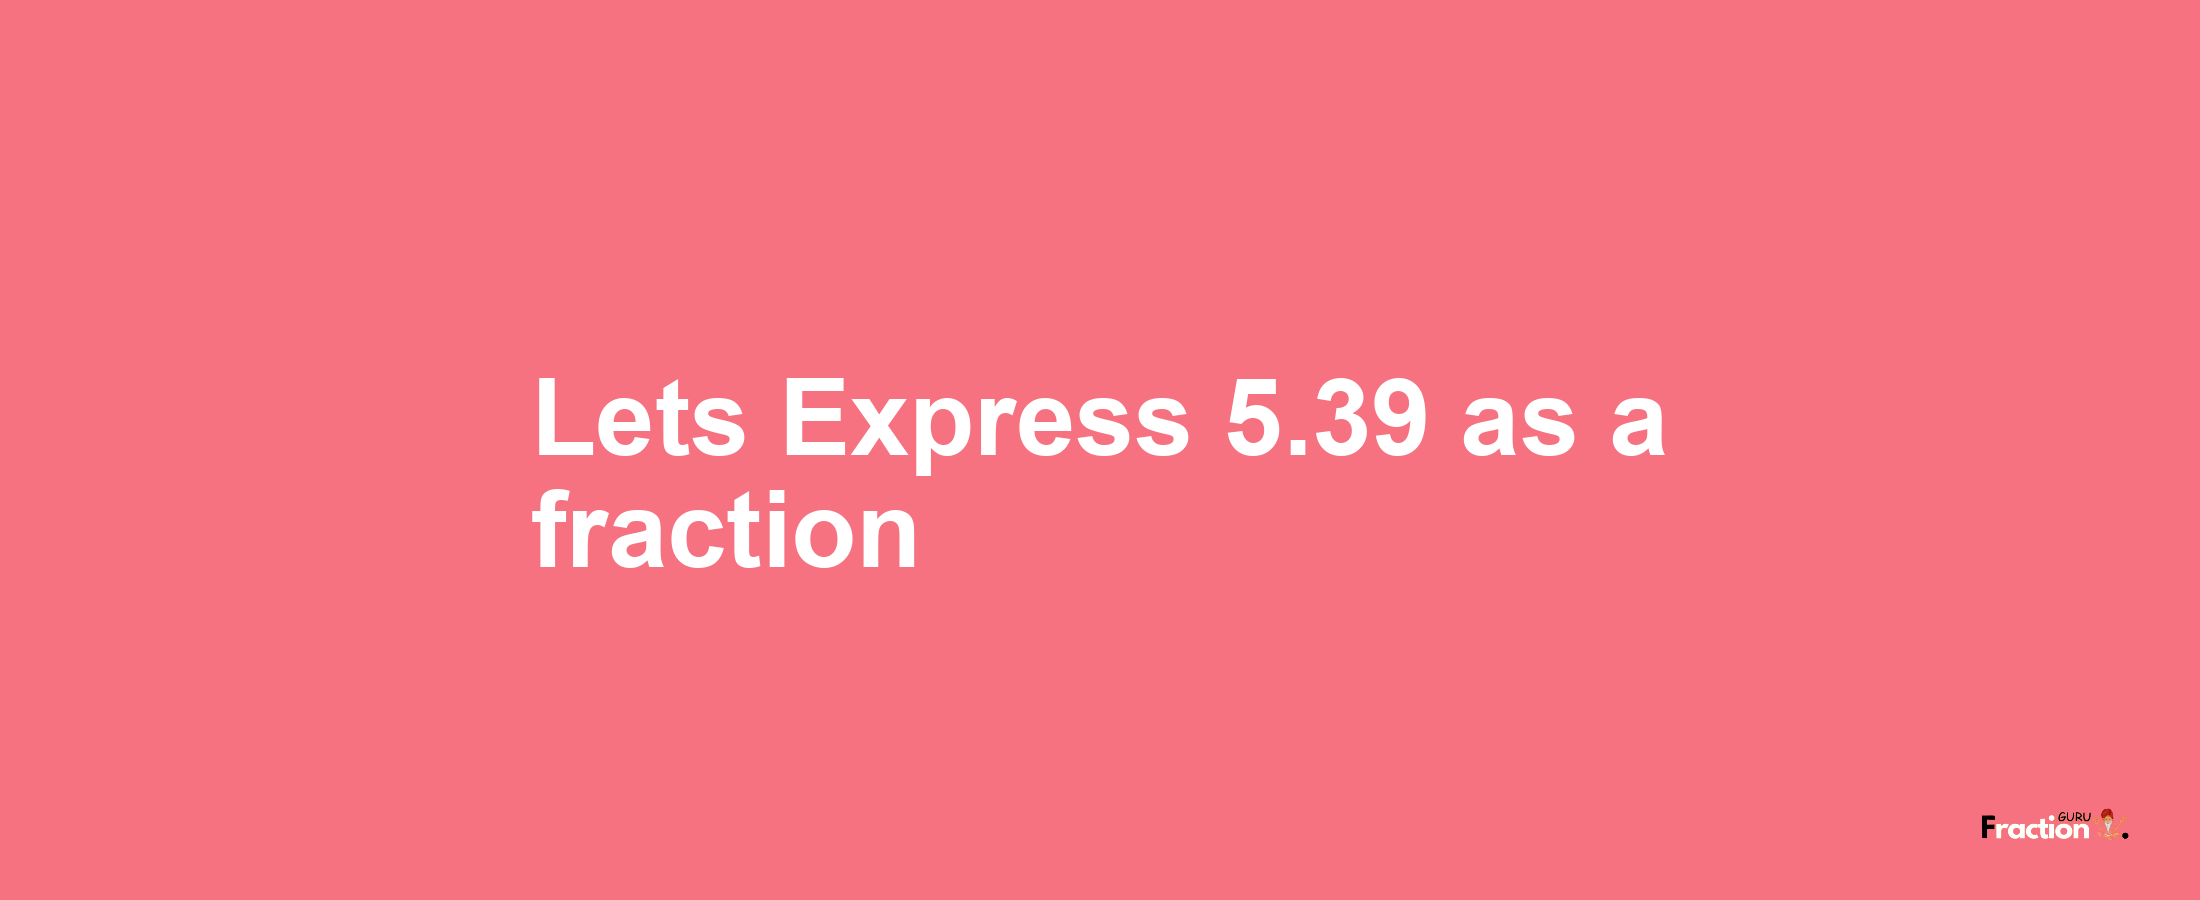 Lets Express 5.39 as afraction